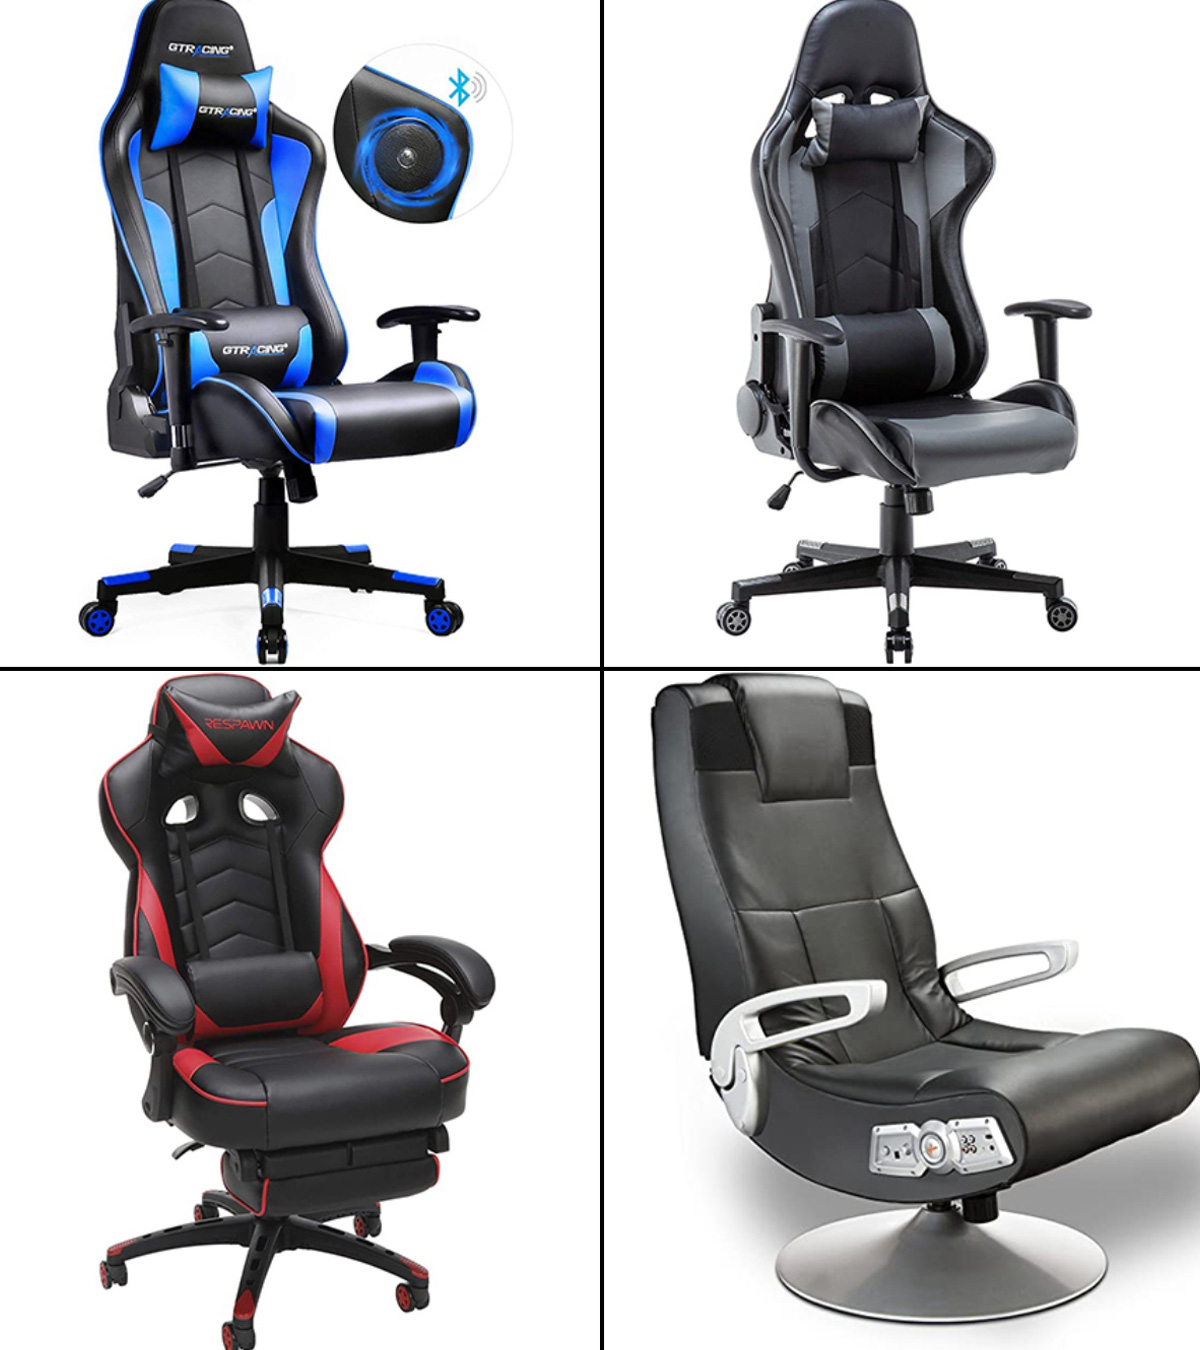 Best Gaming Chairs with Footrests 2022: Reviews, Top-Rated Brands